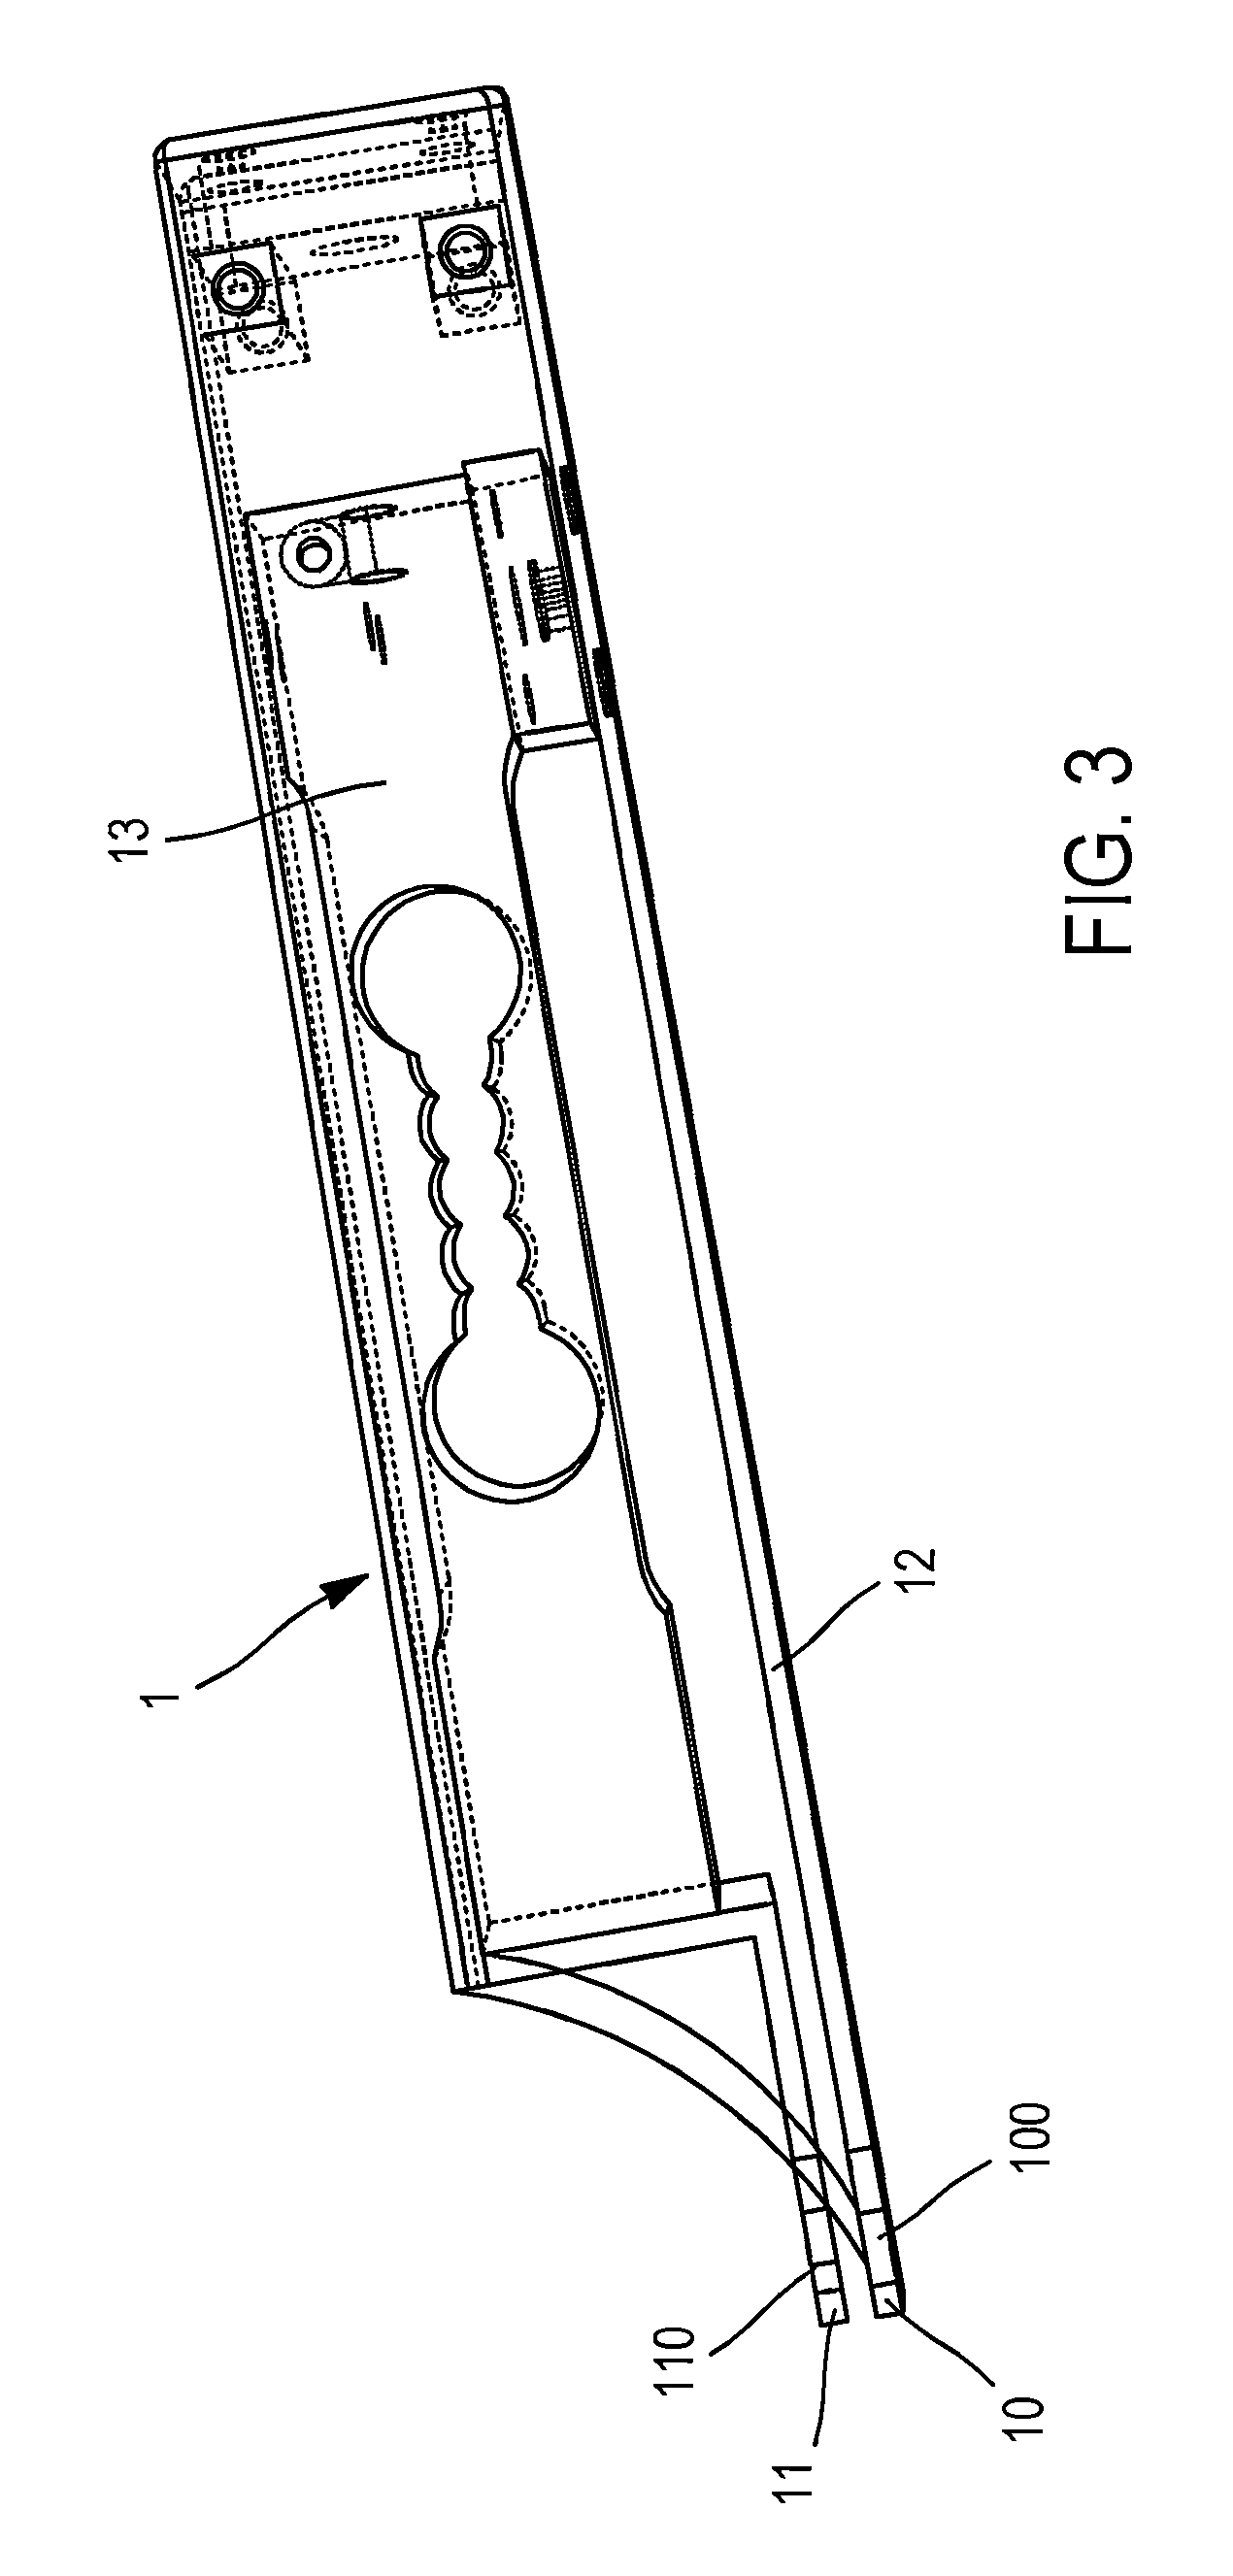 Device for measuring the pinch force between a person's thumb and index finger